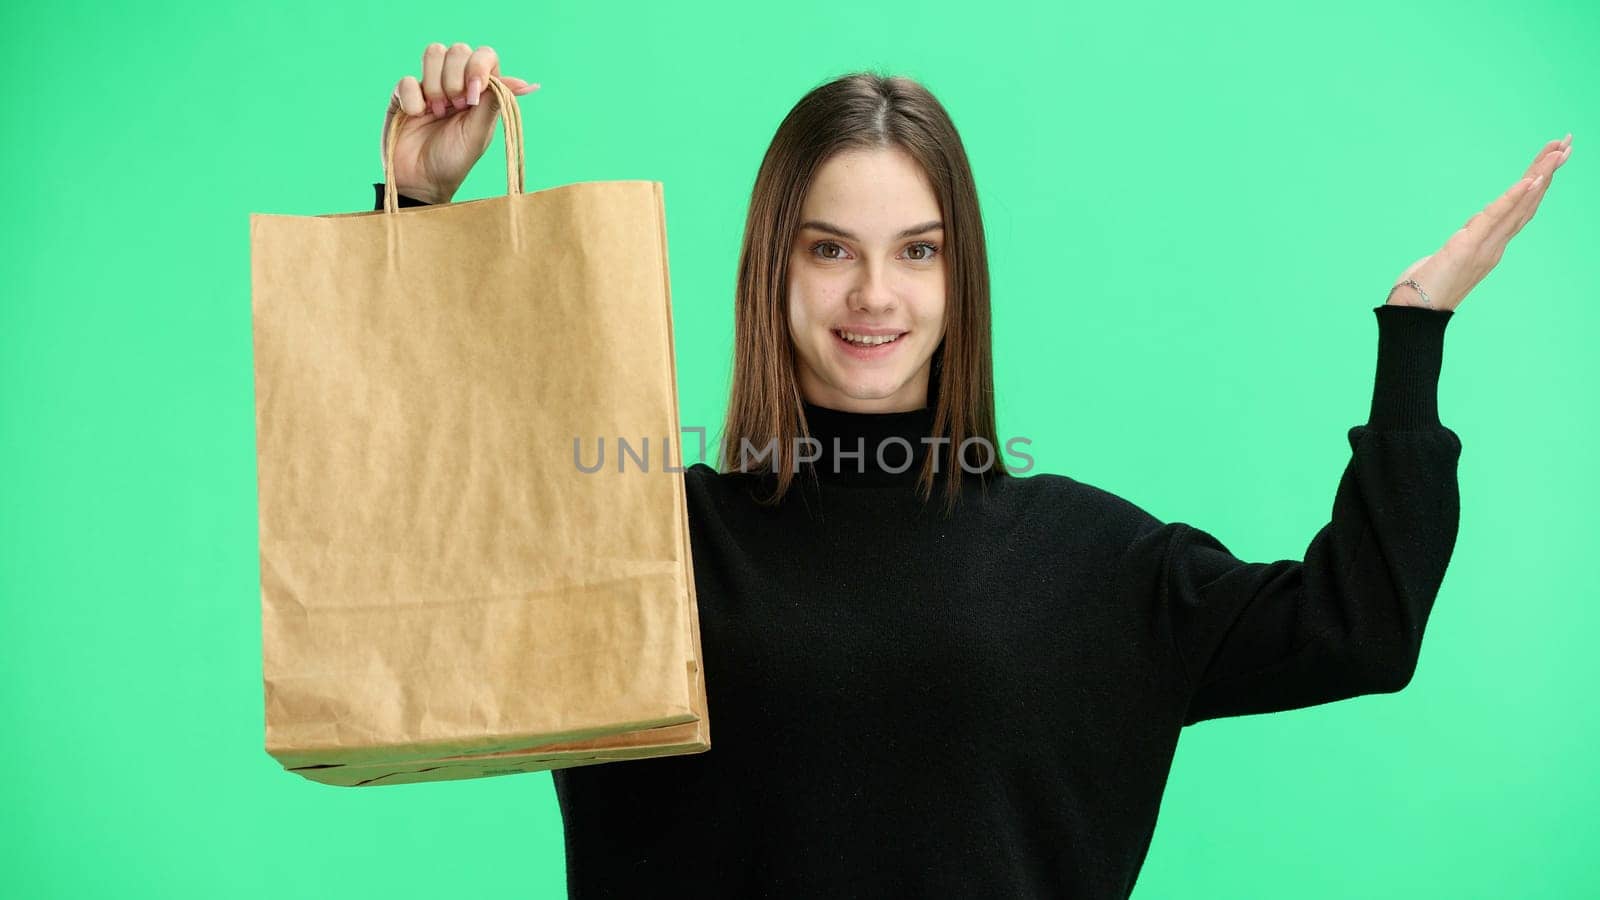 Woman, close-up, on a green background, with bags.